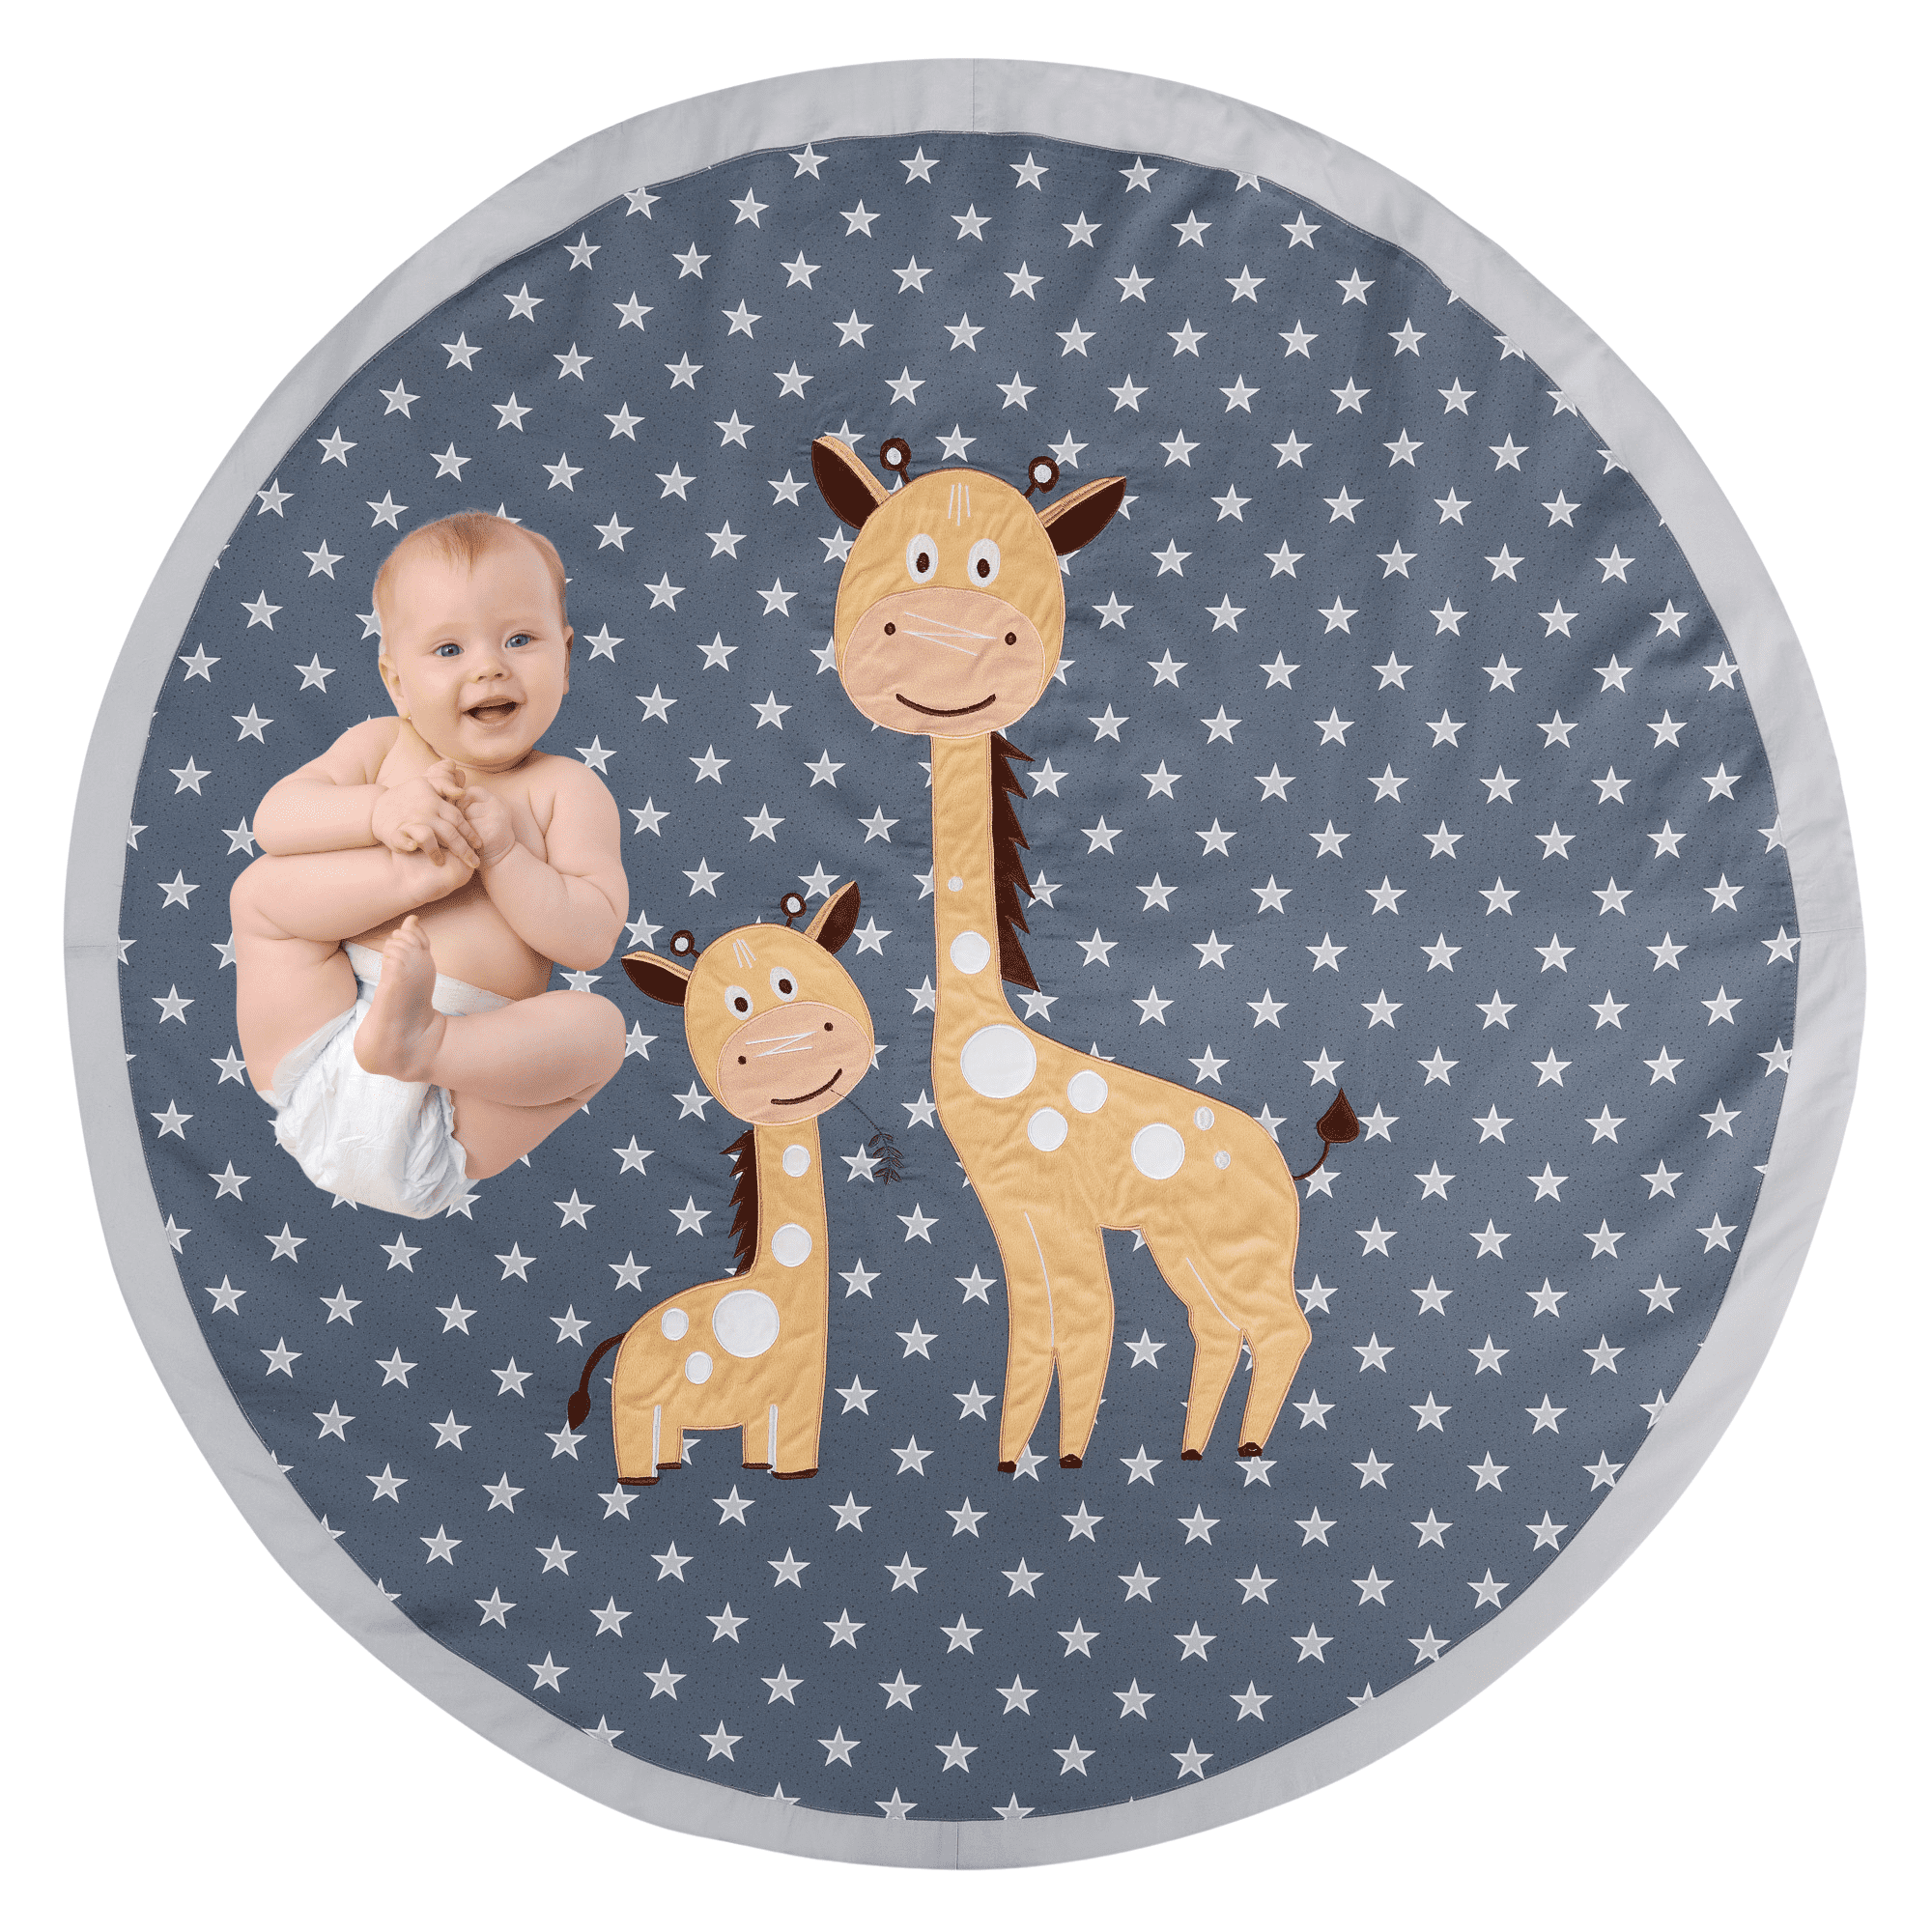 Muslin Baby Play Mat | Playpen Mat - Large Padded Tummy Time Activity Mat  for Infant & Toddler, Grey